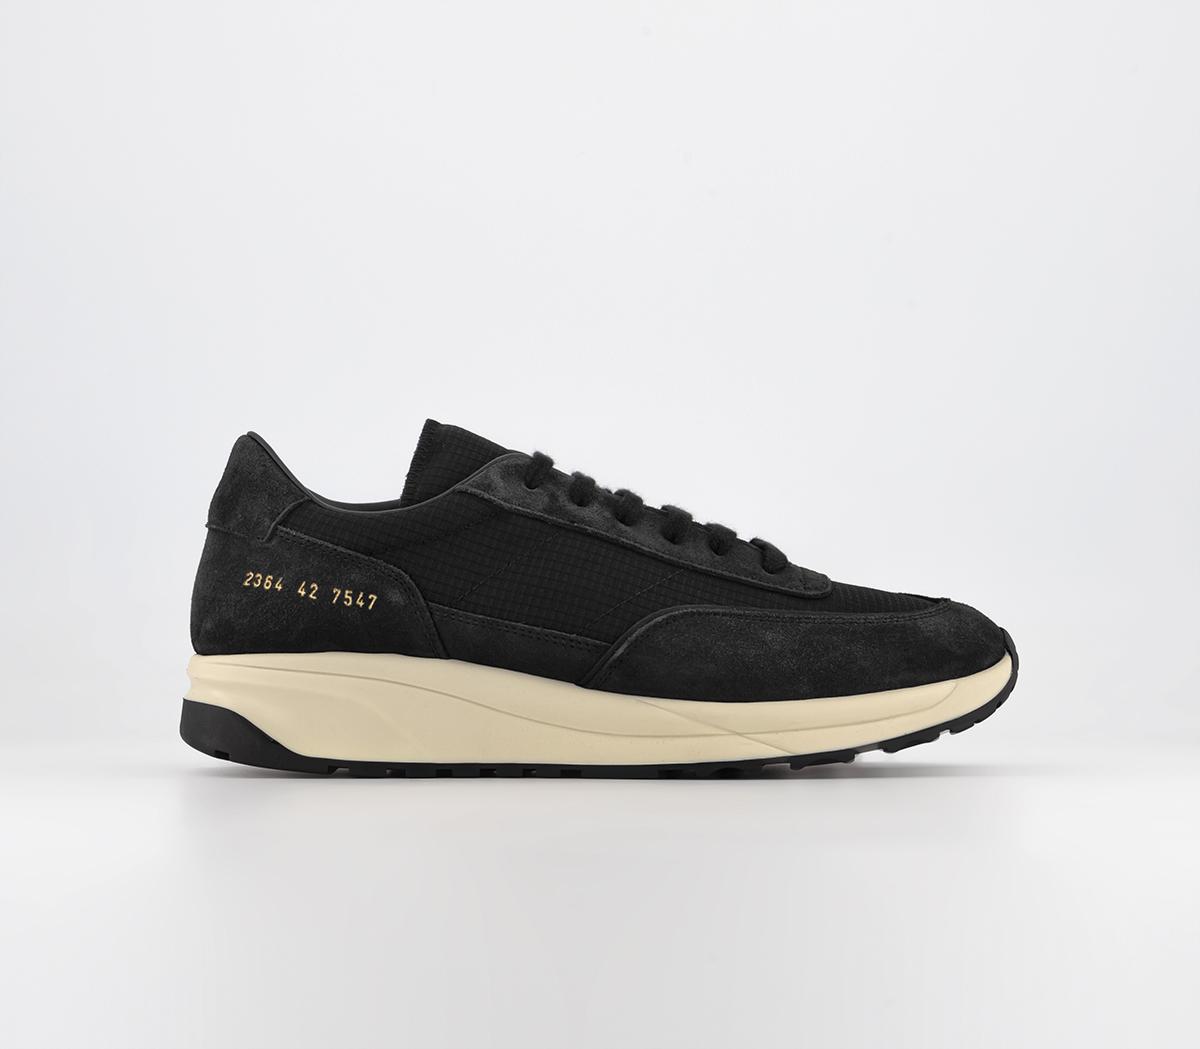 Common ProjectsTrack 80 Trainers Black